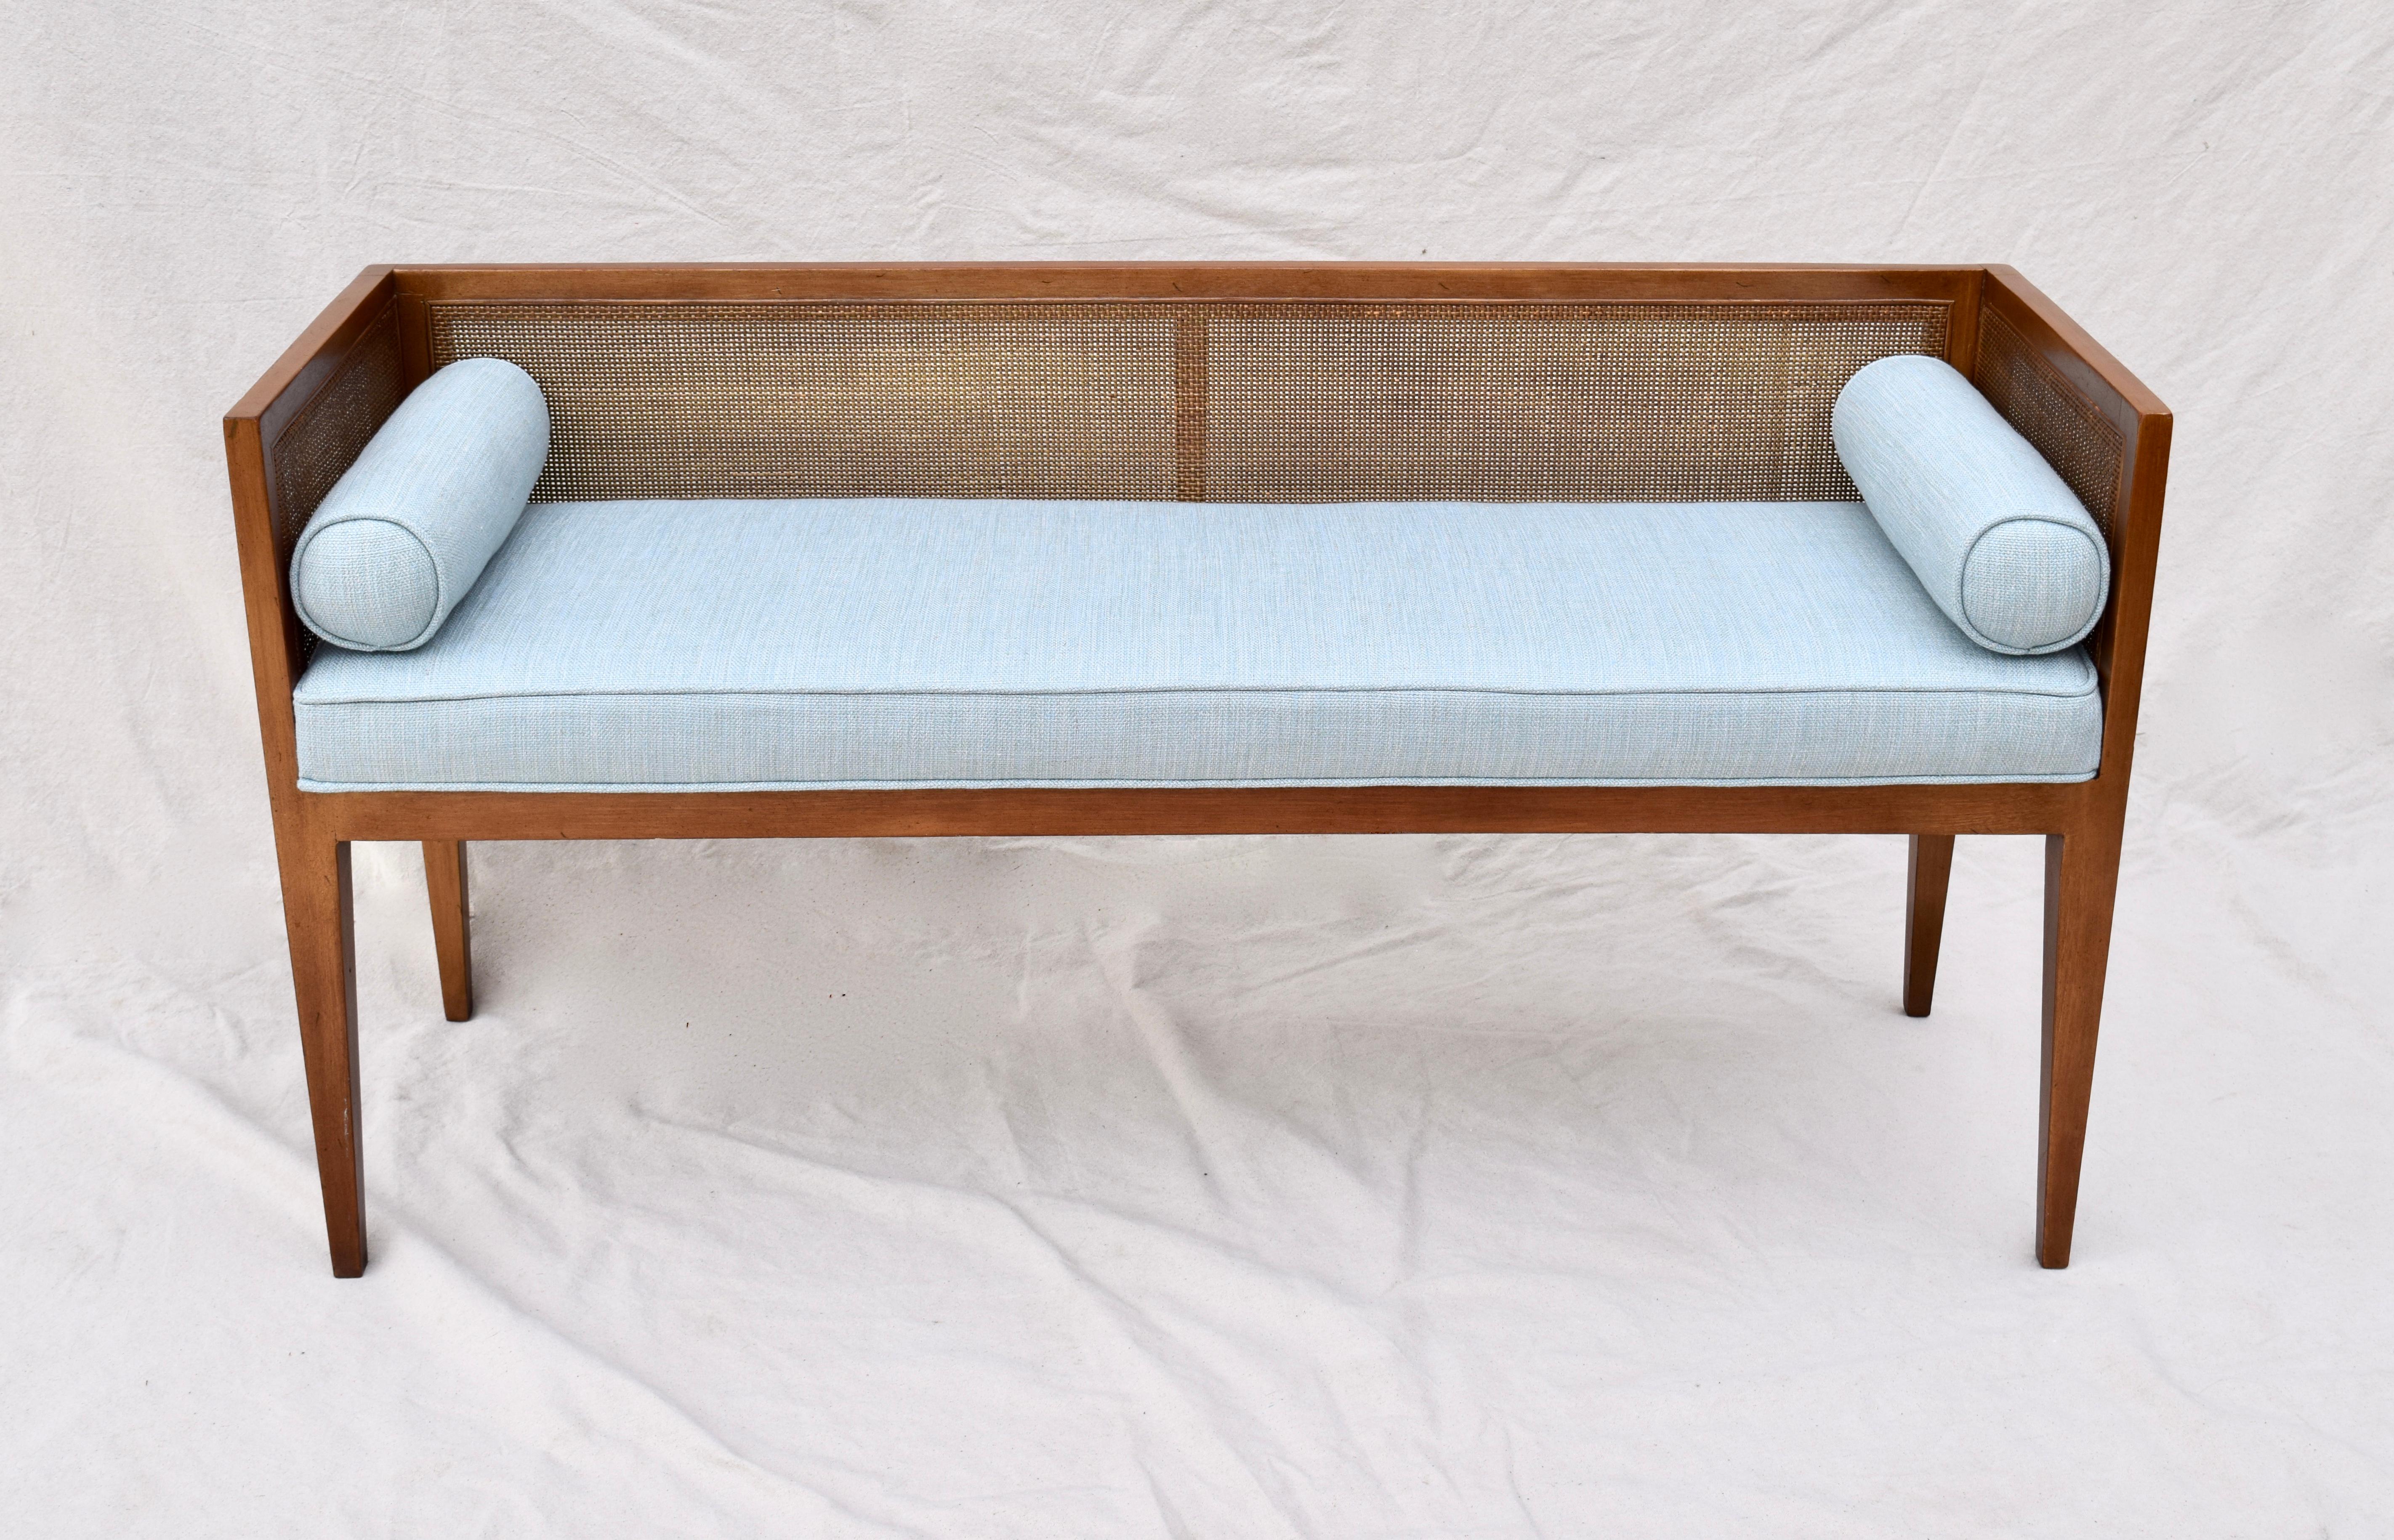 Solid mahogany Mid-Century Modern window bench or settee attributed to Edward Wormley for Dunbar. Lithe line design constructed of mahogany frame with original fine scale caning. Restored seat and bolster cushions are upholstered is soft blue linen.